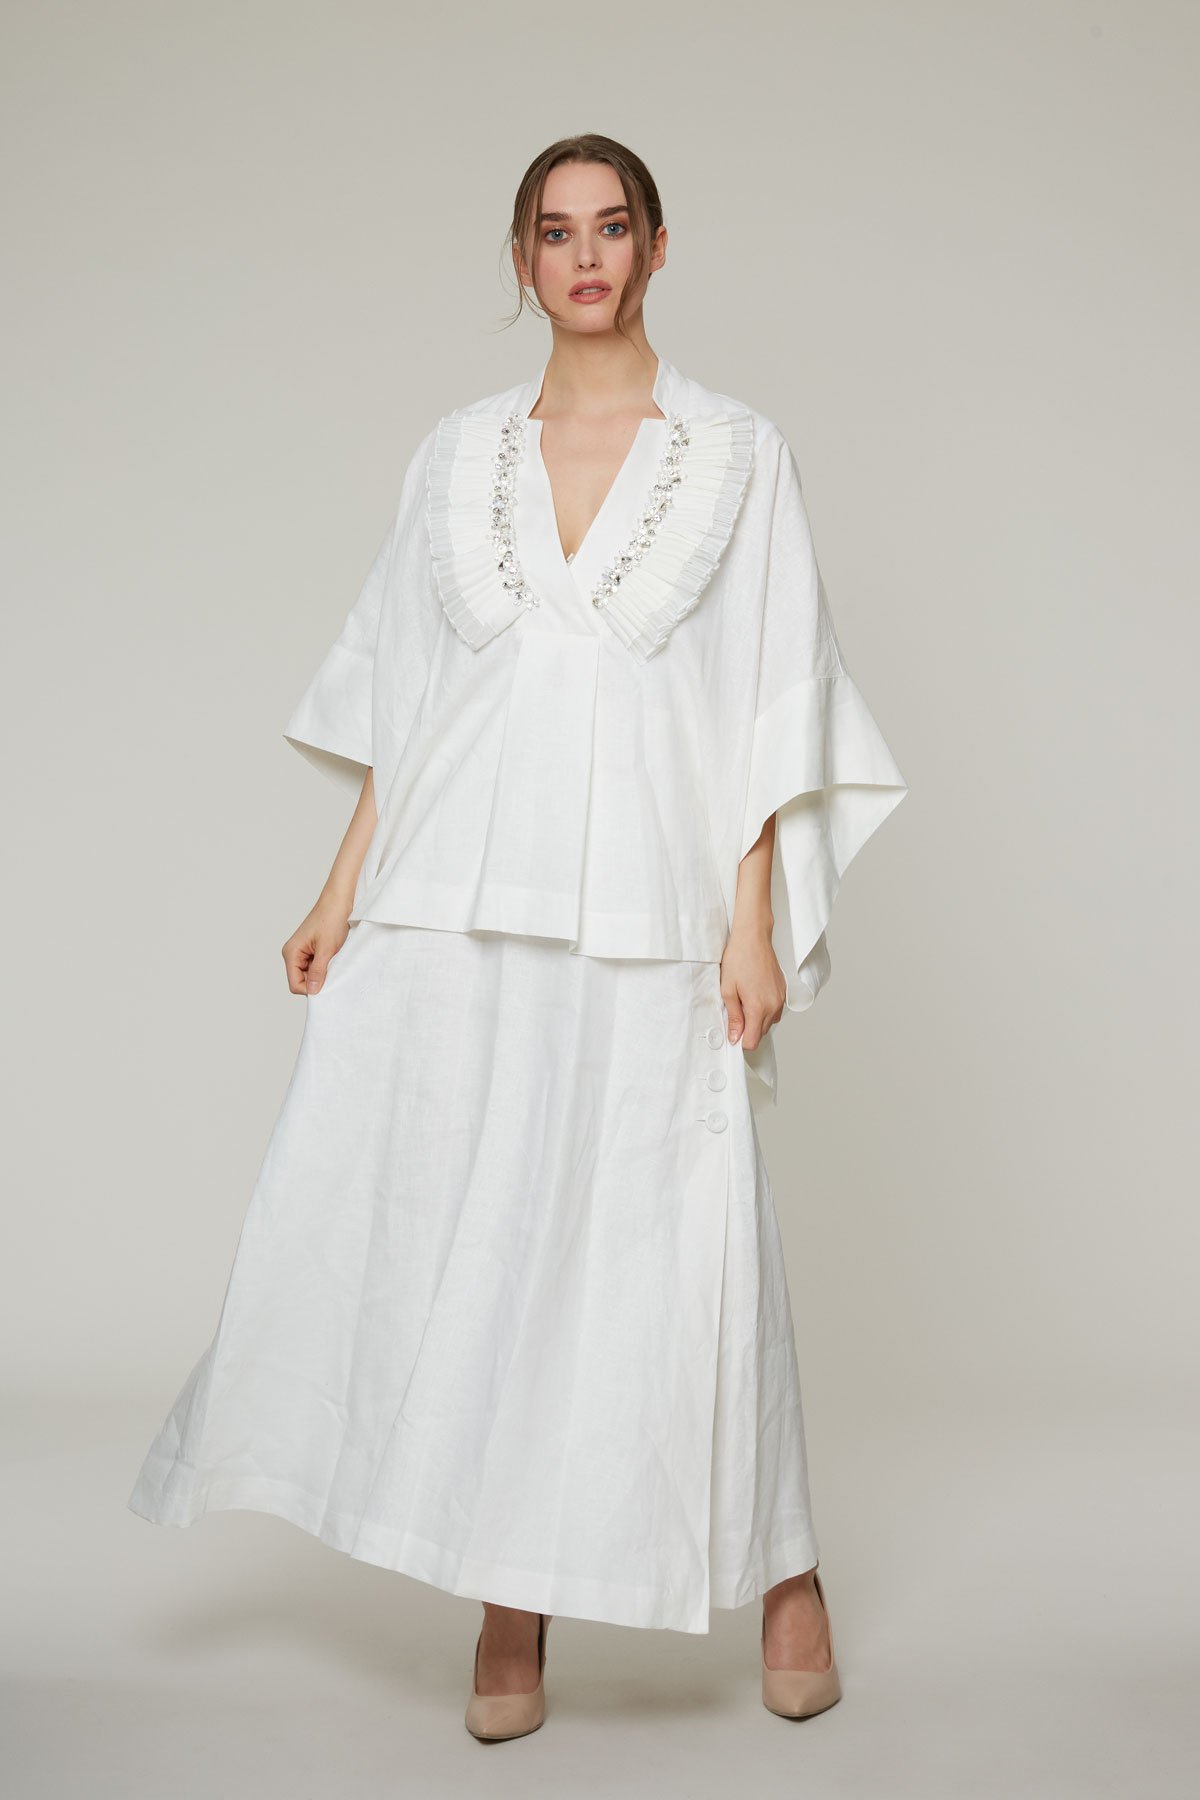 Embroidery And Ruffle Detailed, Bat Sleeve Layered Long Dress